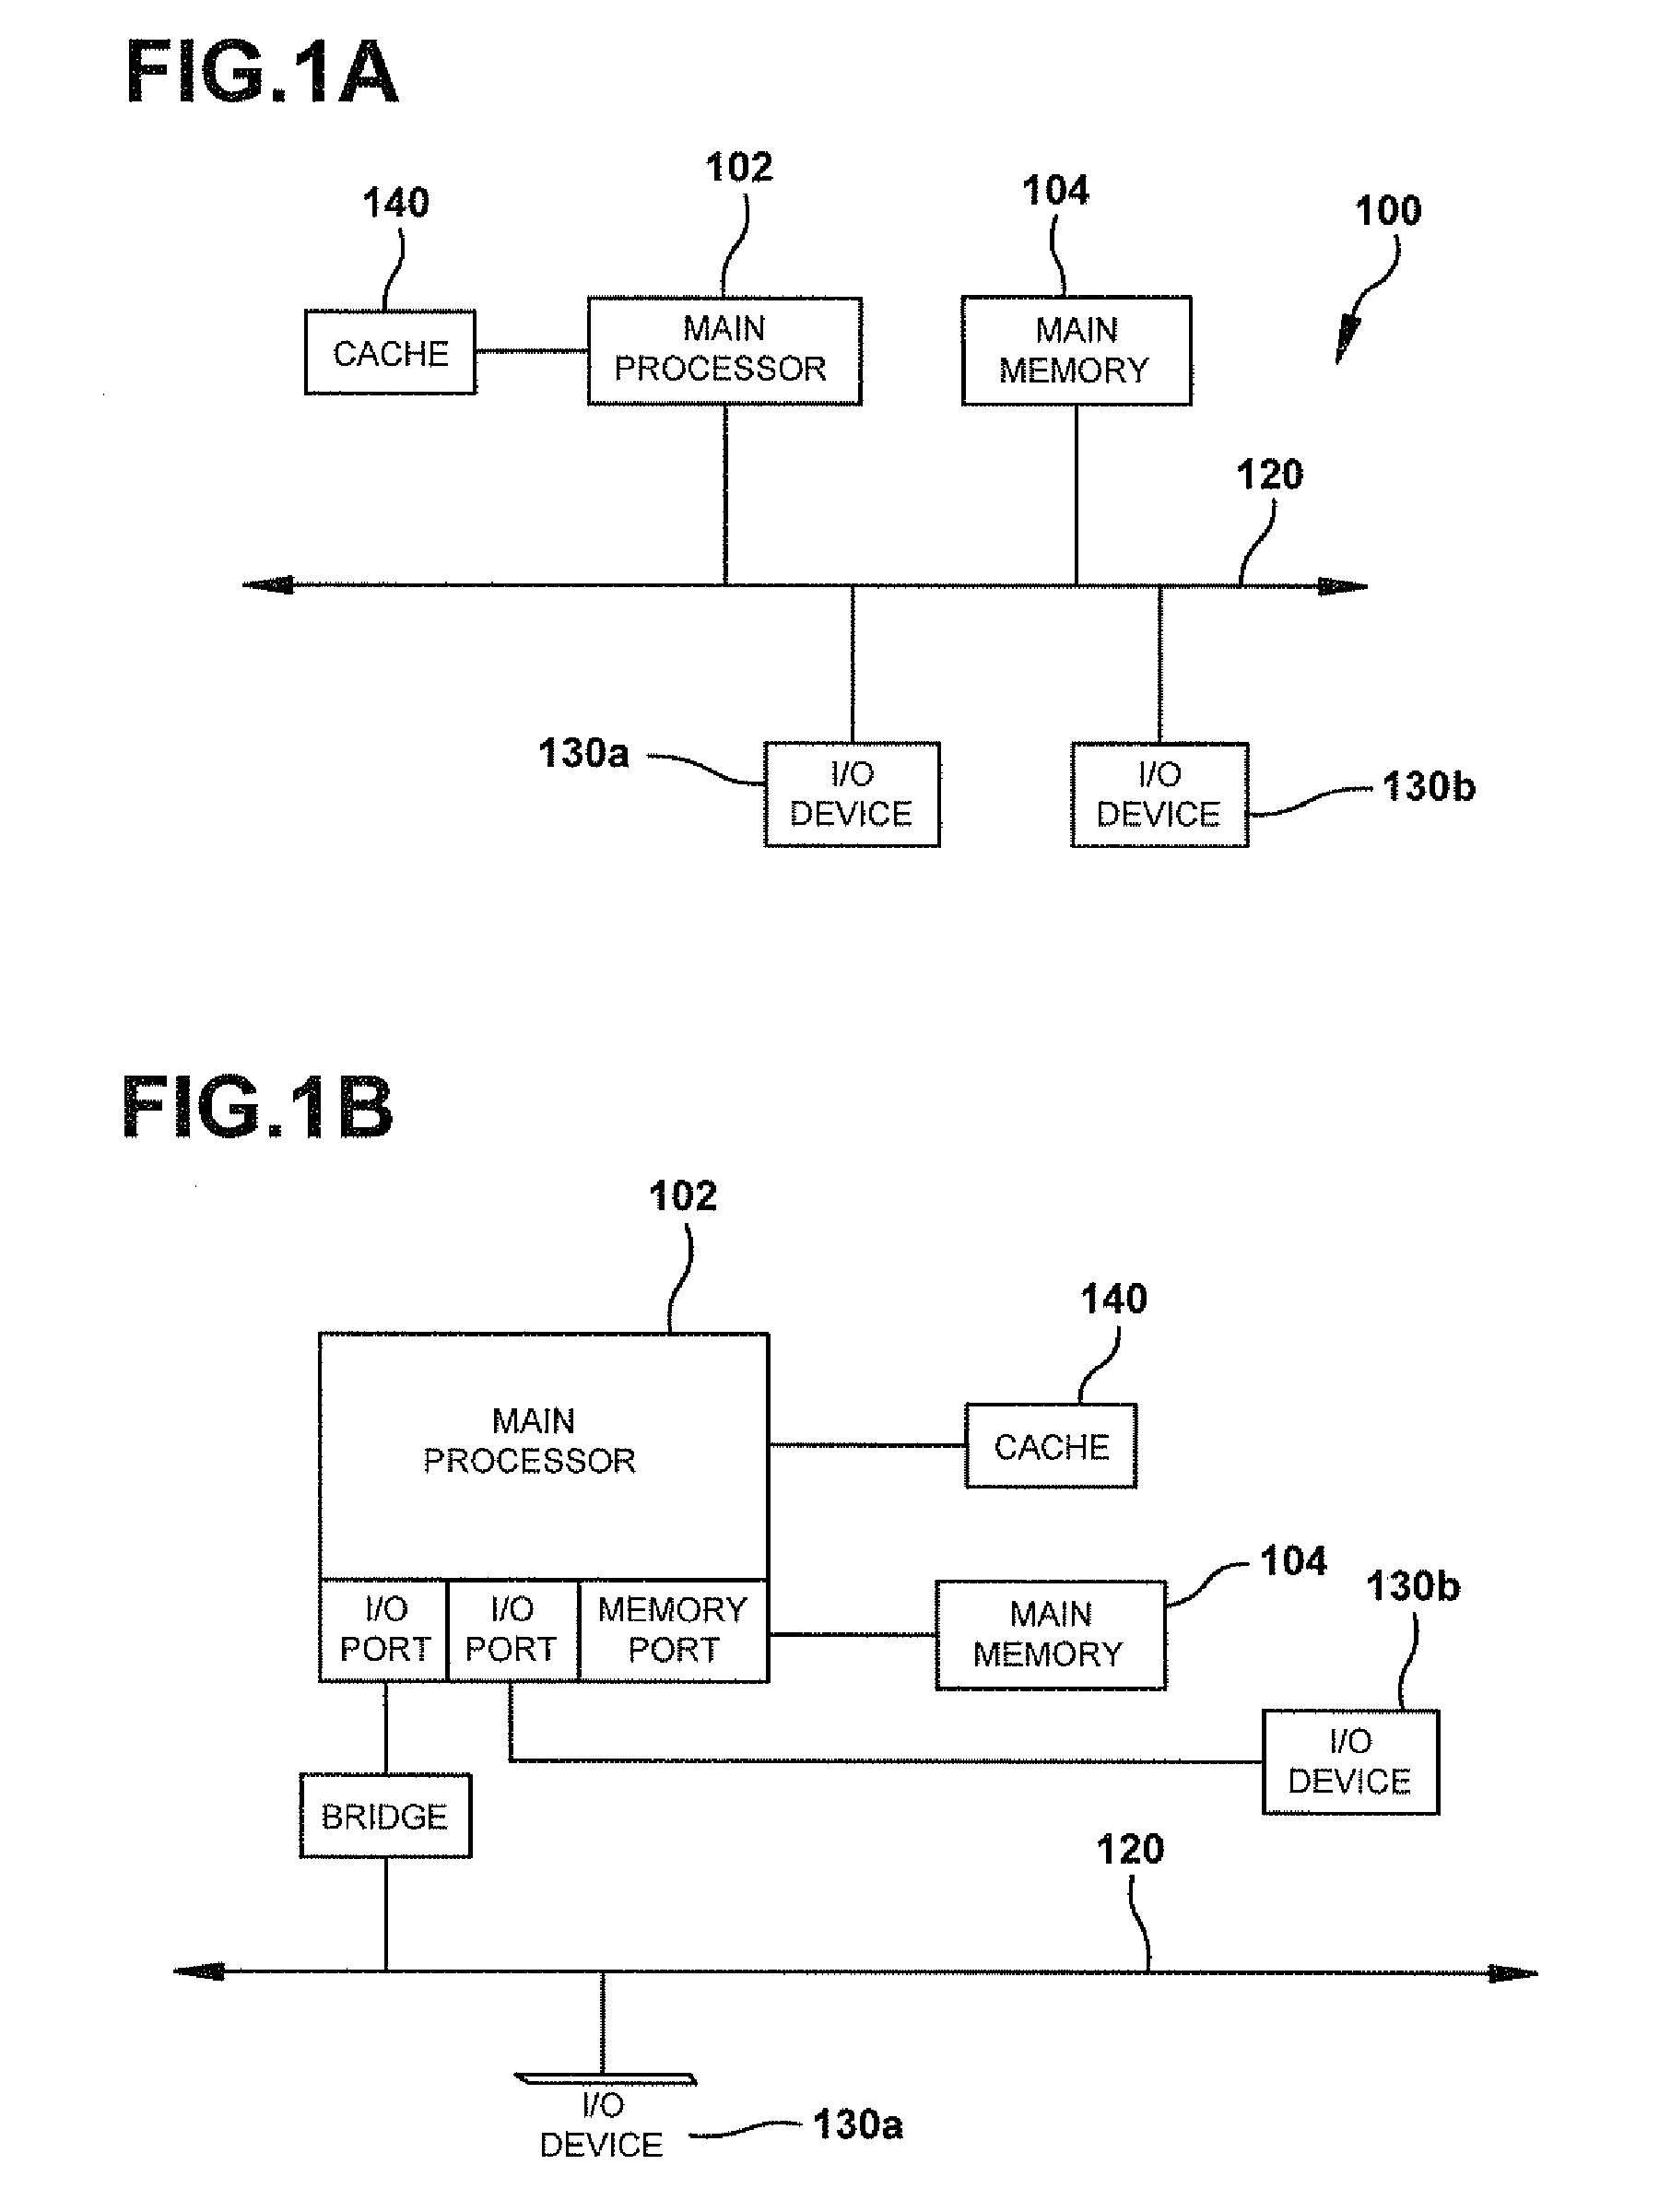 Methods and systems for providing access to a computing environment provided by a virtual machine executing in a hypervisor executing in a terminal services session